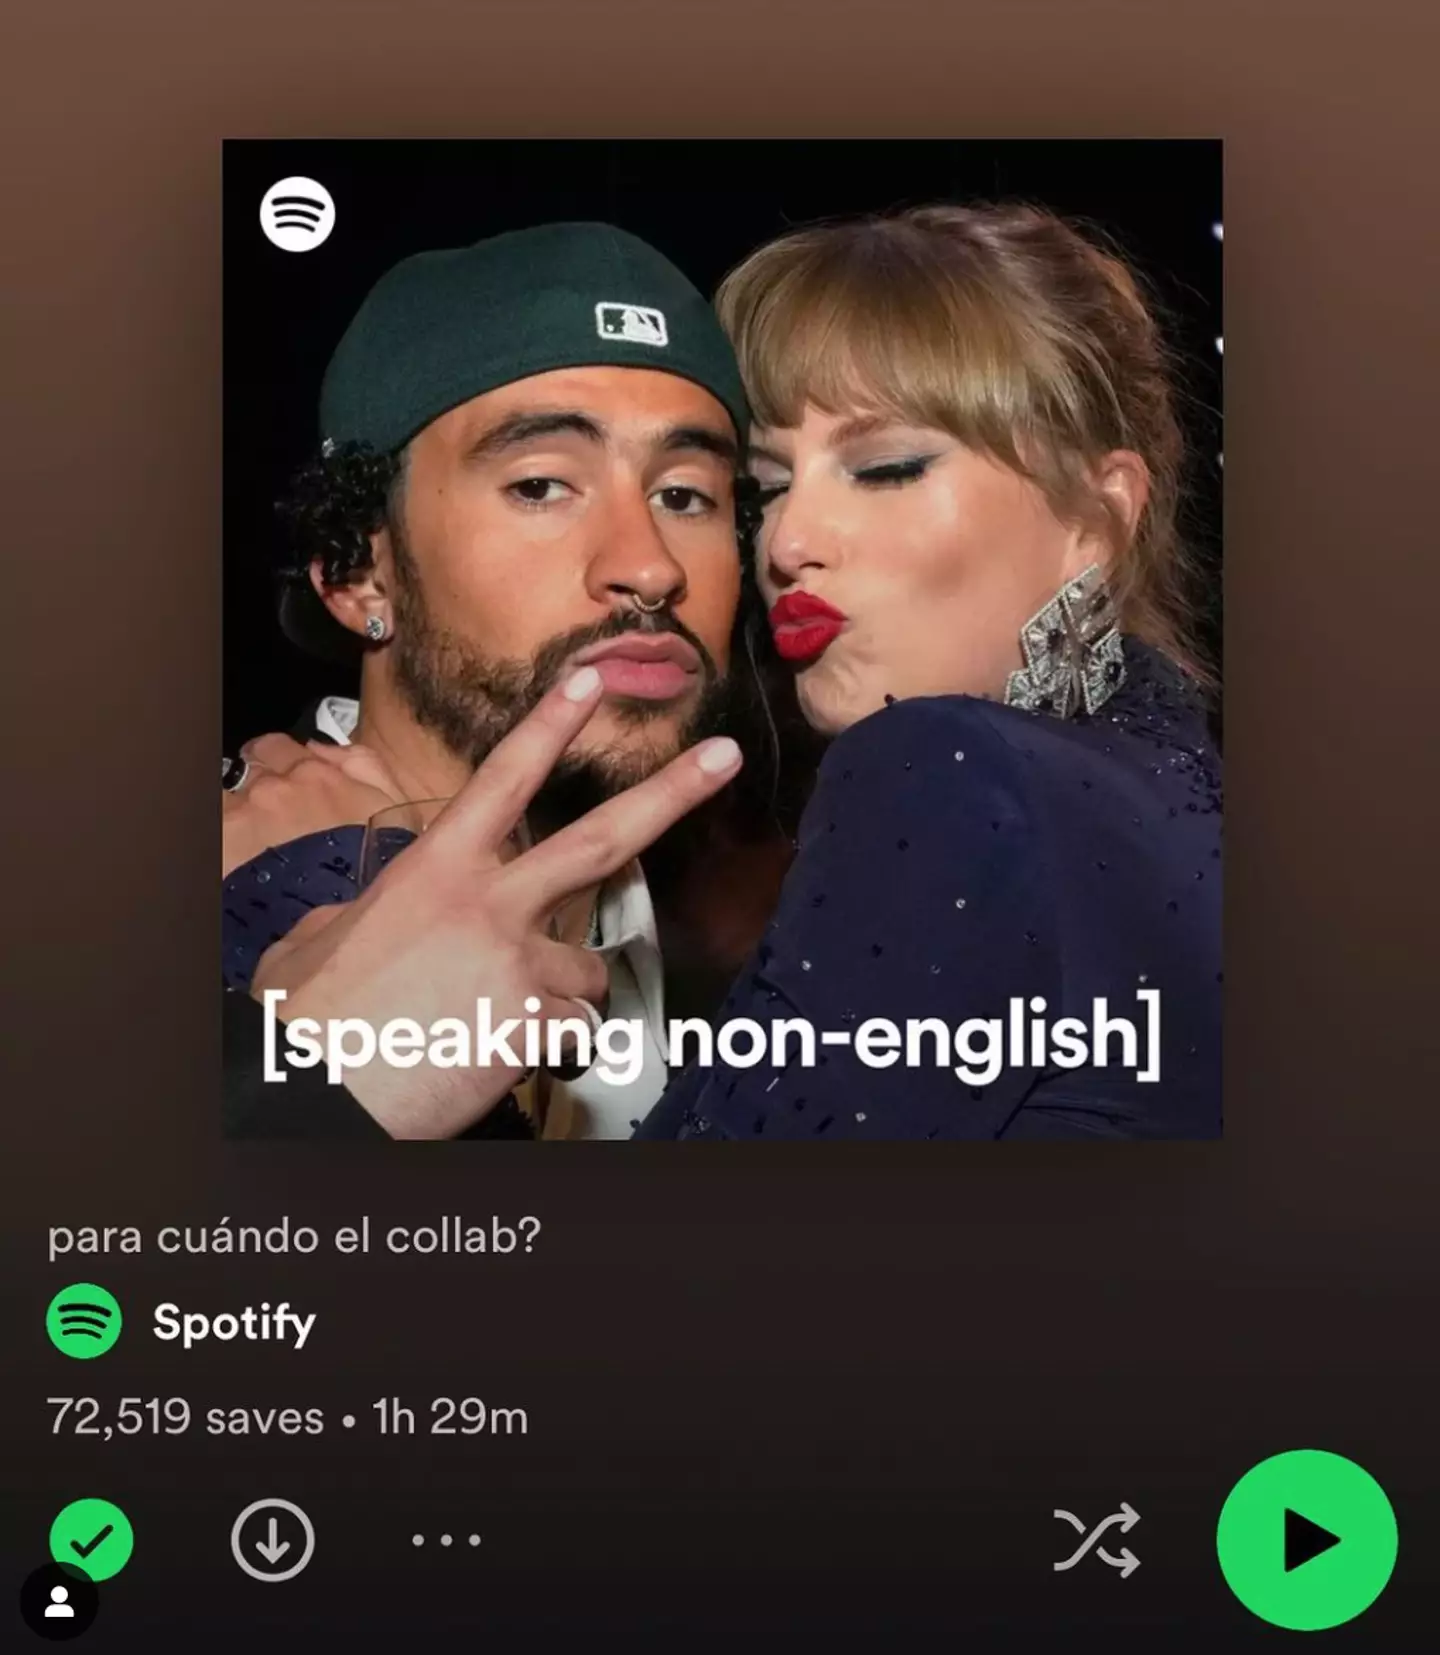 Spotify has a brand new playlist inspired by the subtitles.